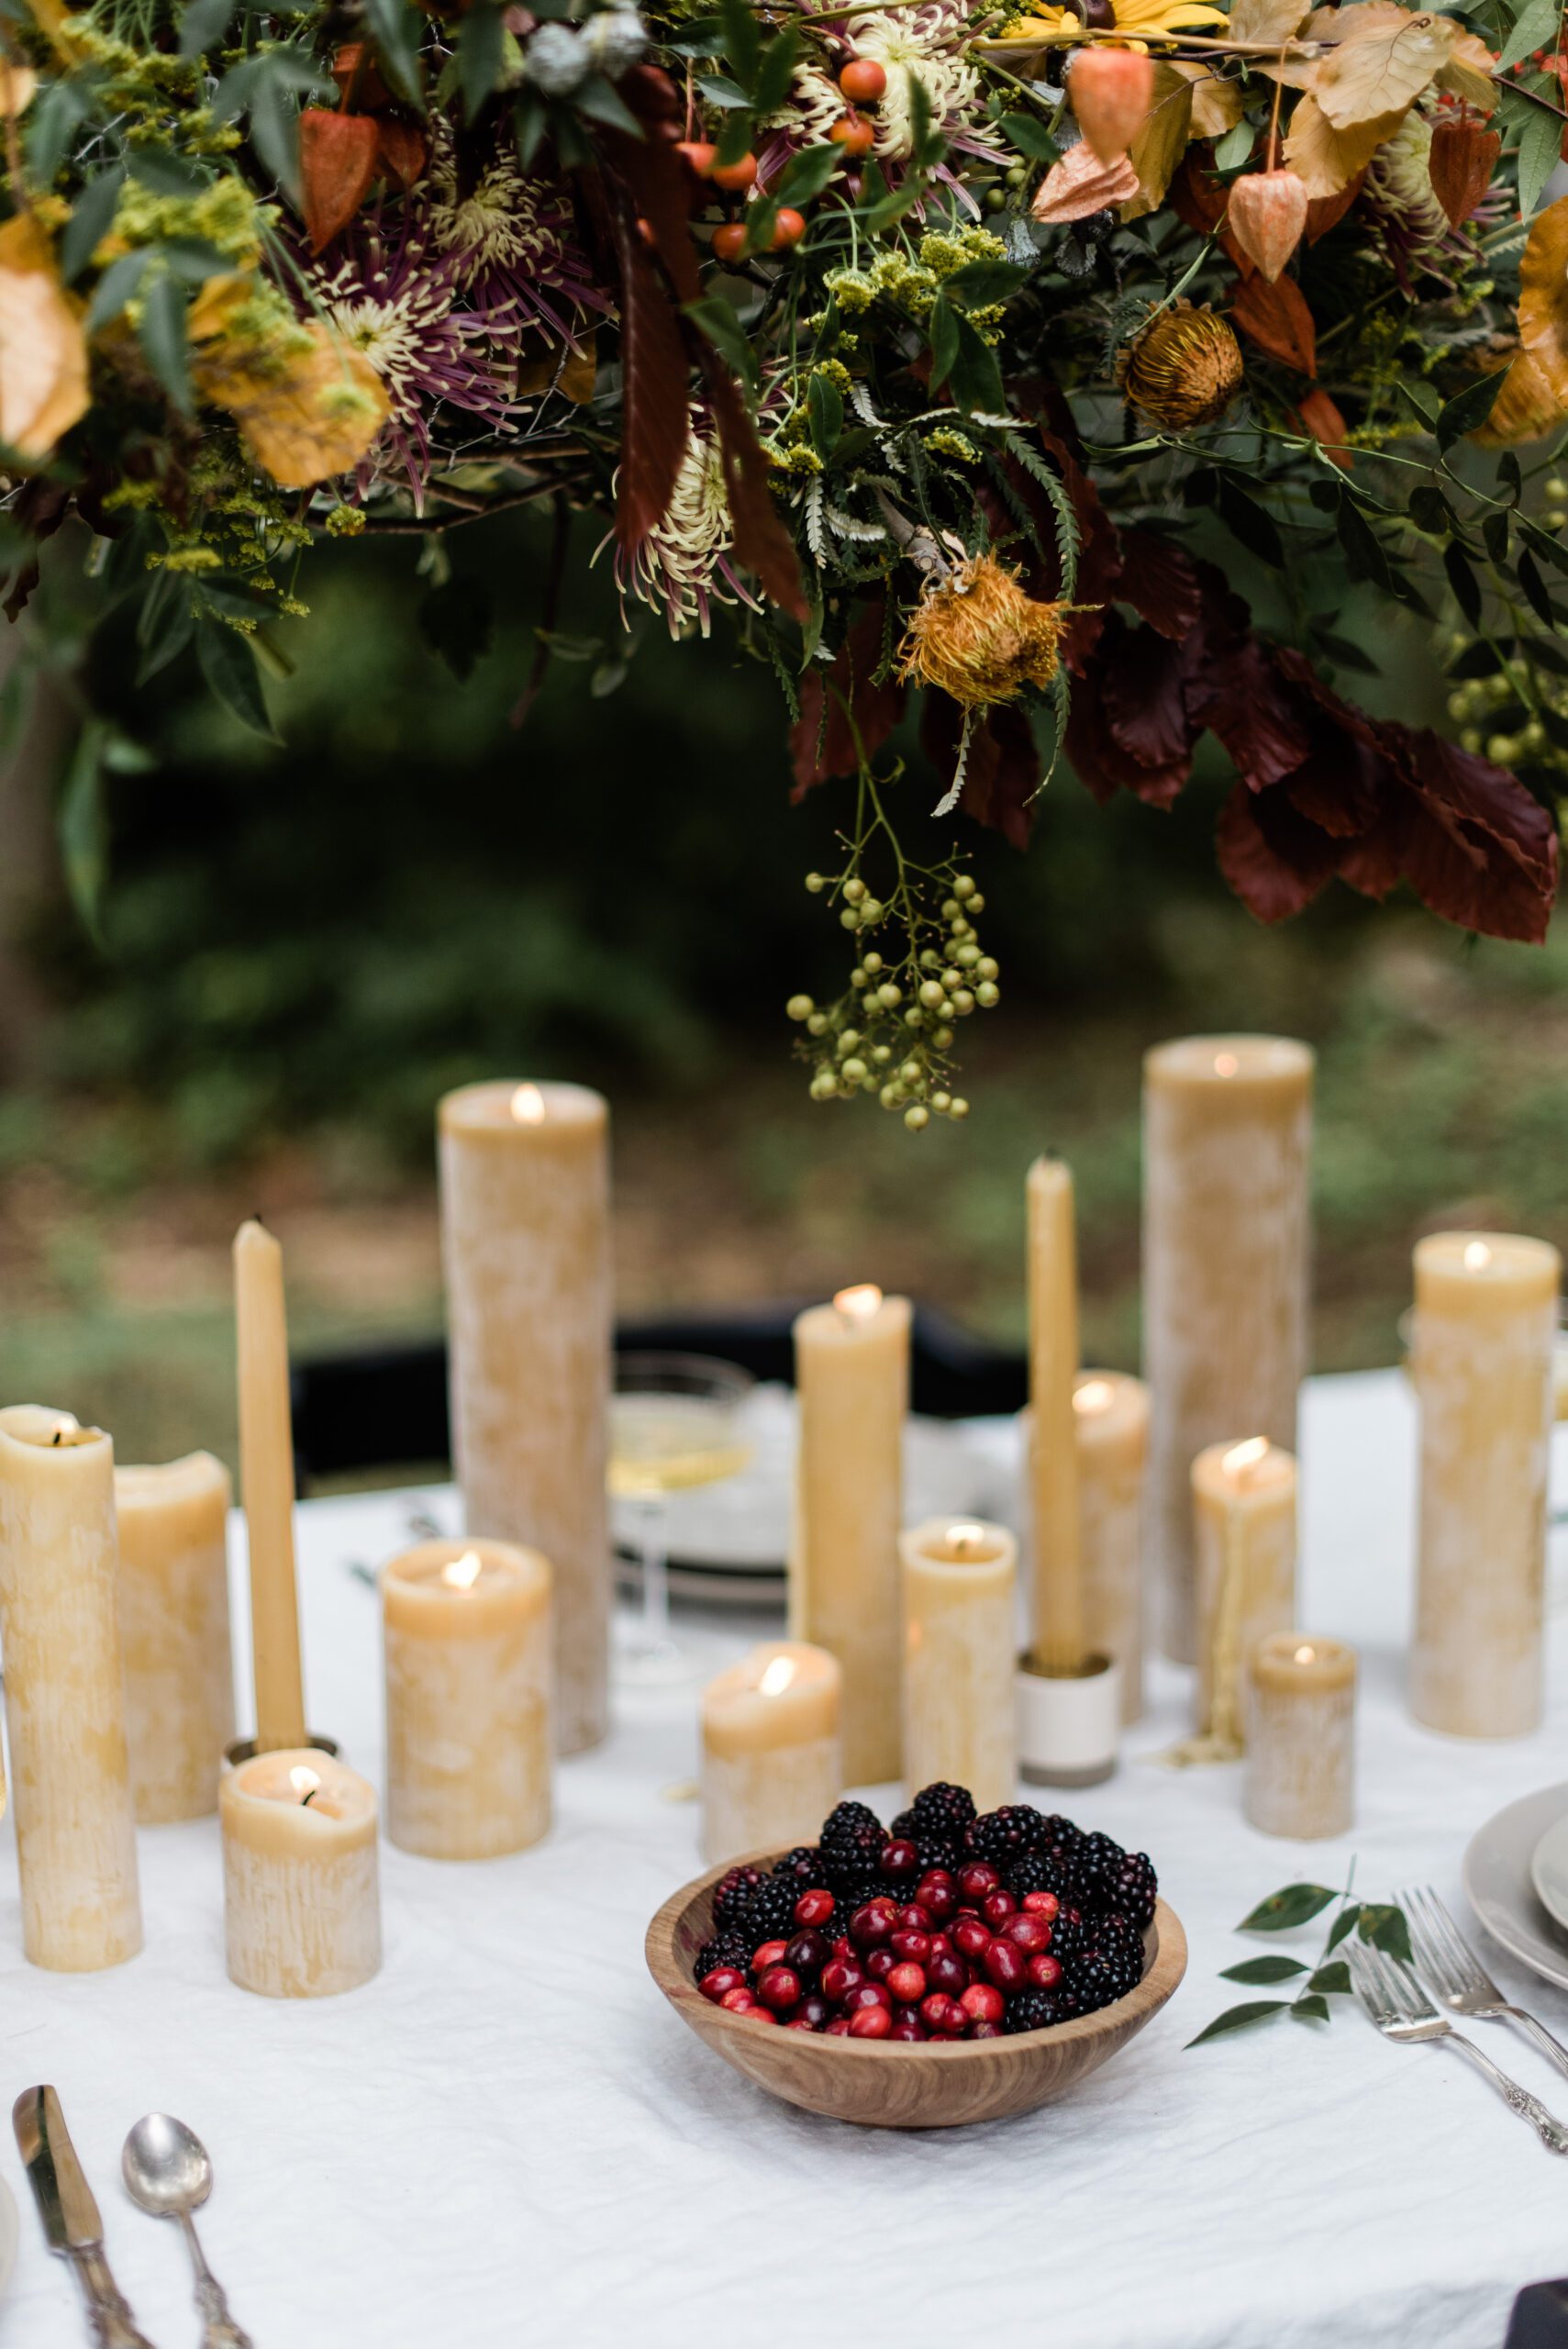 beeswax candle centerpiece on outdoor table